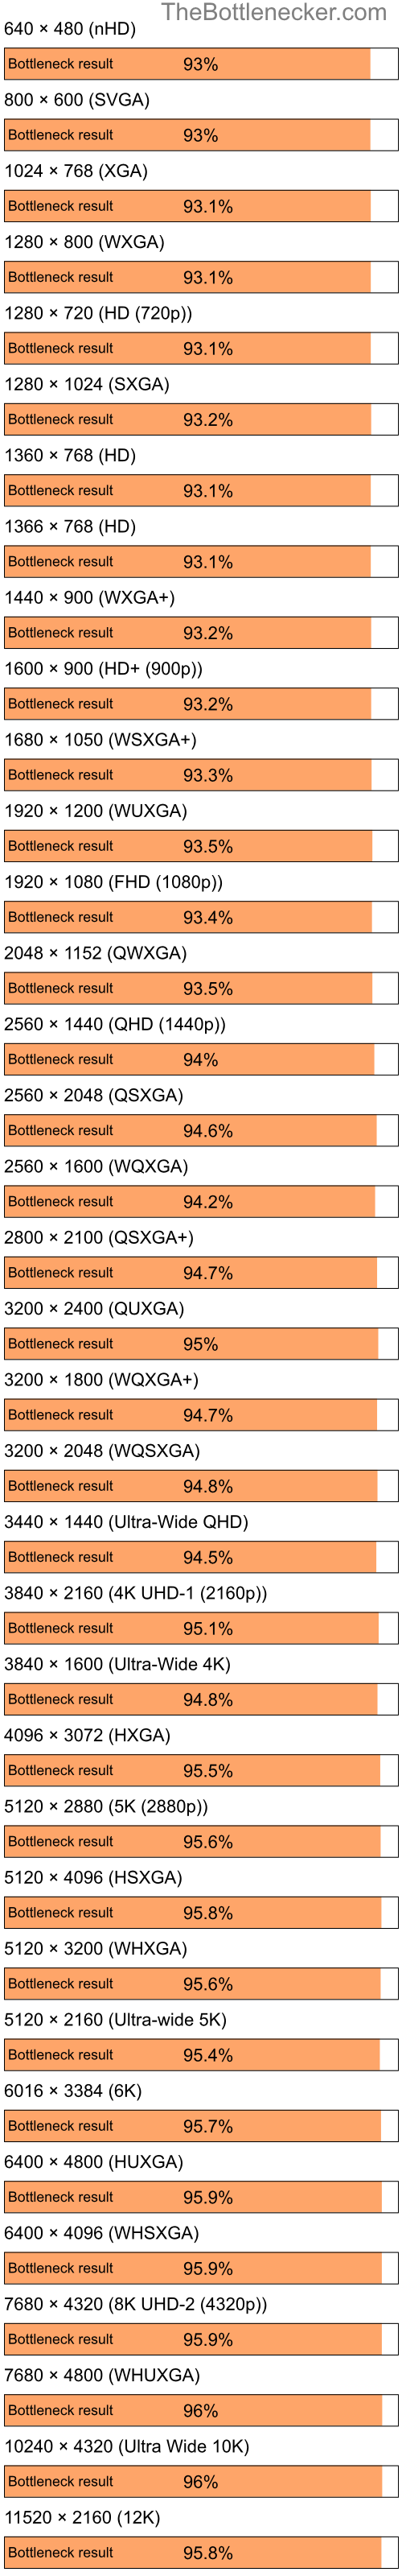 Bottleneck results by resolution for Intel Atom Z520 and AMD Radeon 9200 PRO Family in Graphic Card Intense Tasks